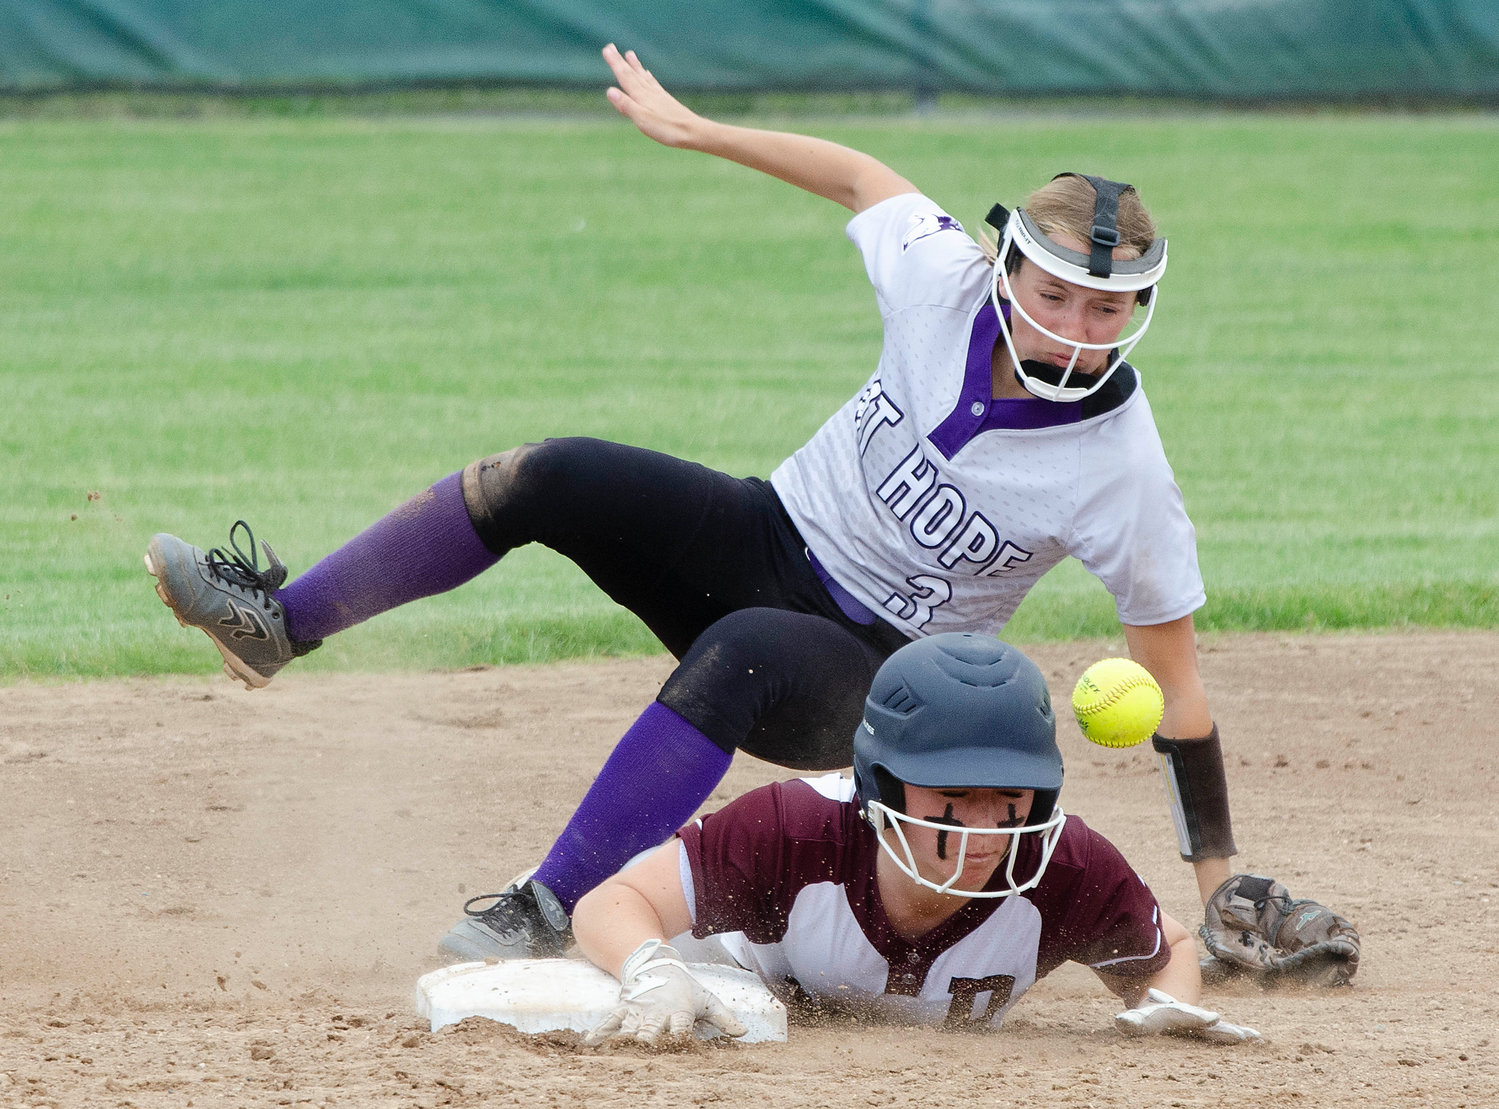 Prout’s Mead D’lorio up ends Huskies second baseman Alice Grantham as she slid into second base to lead off the inning. She later scored on a double by Alivia Ring to tie the game 1-1.